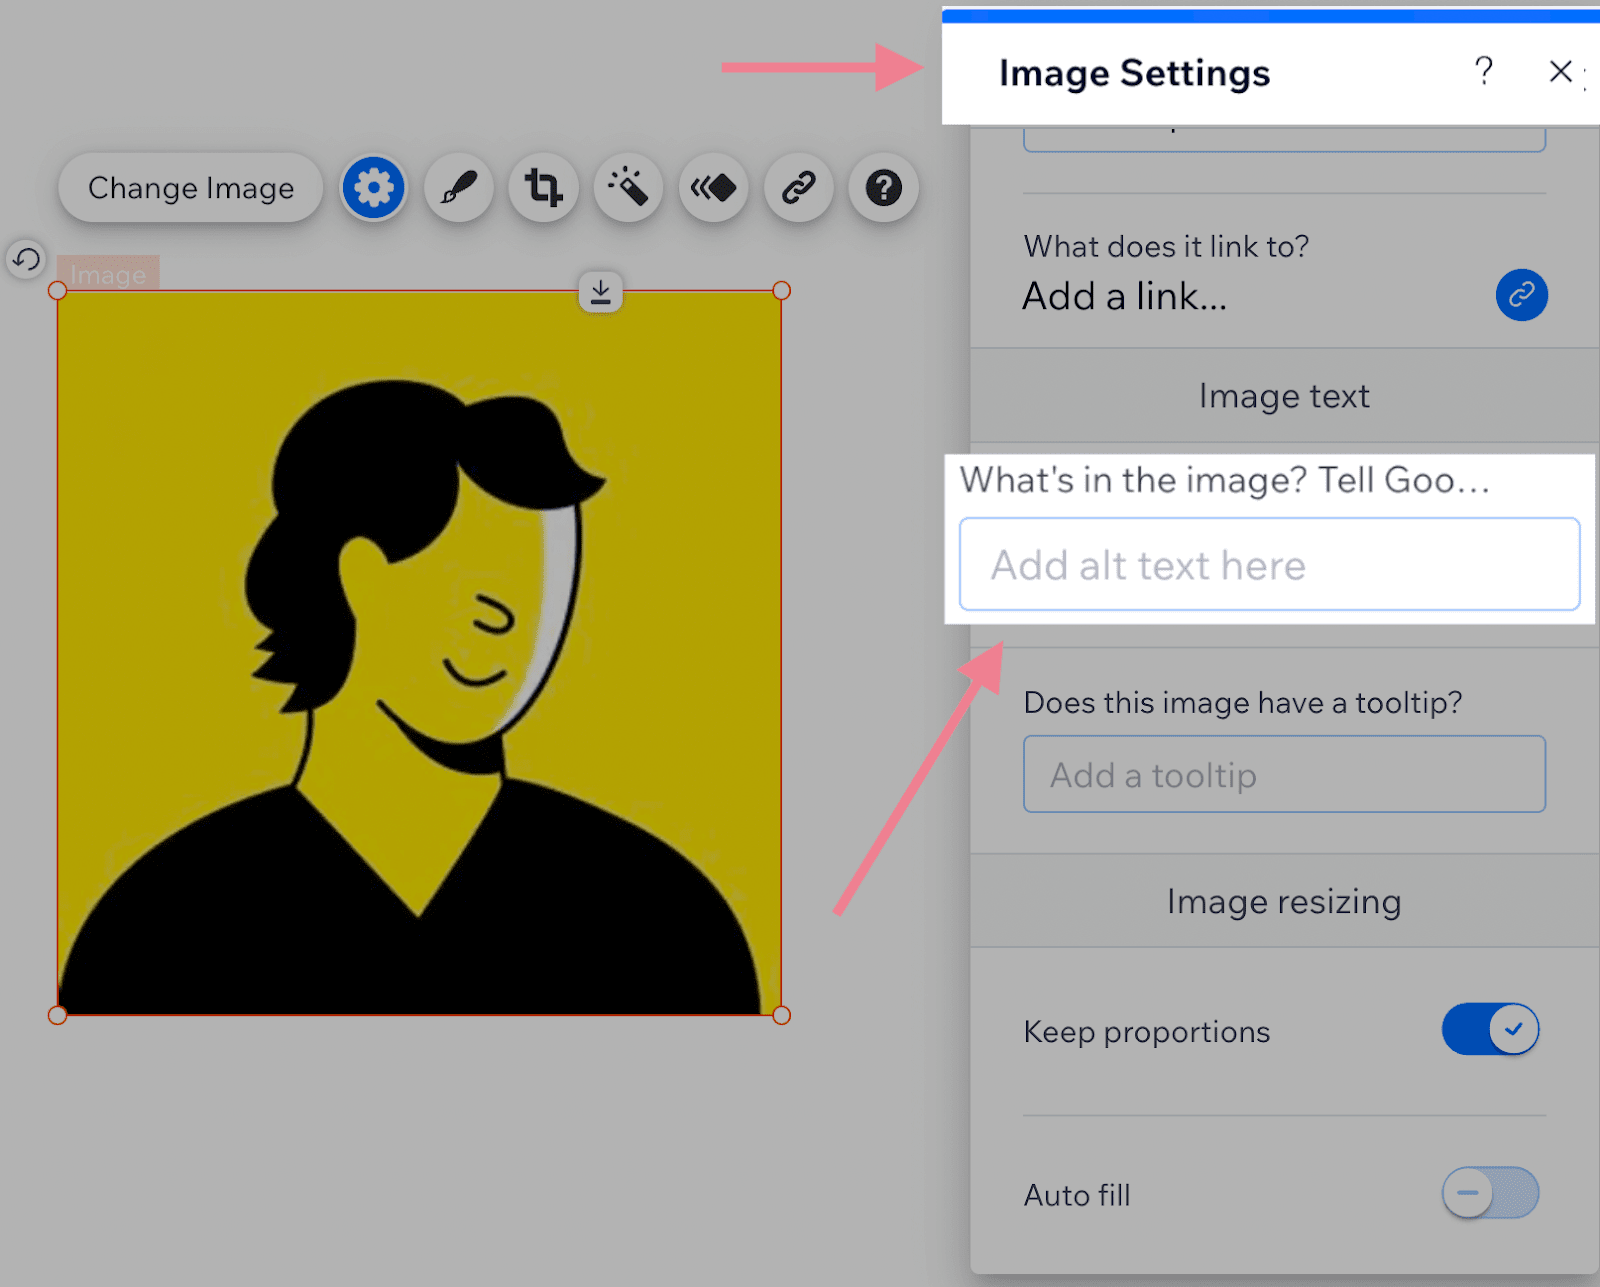 Add alt text in image settings